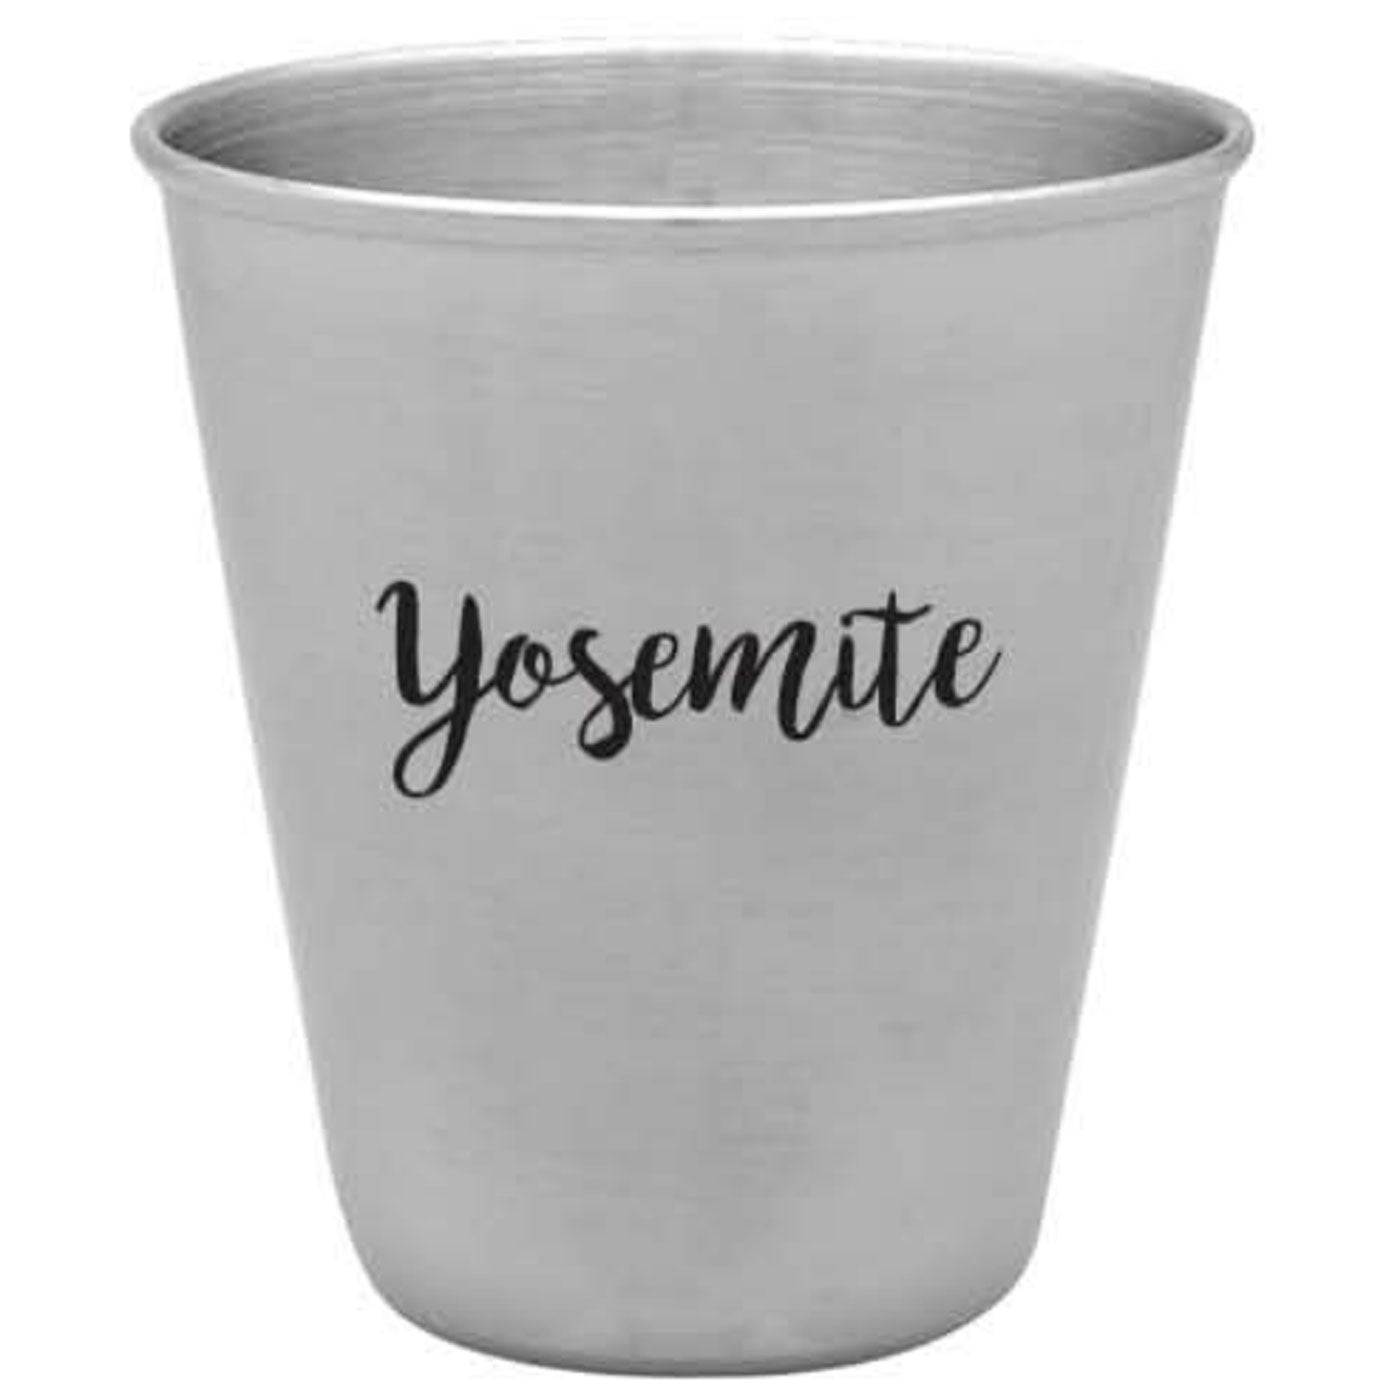 Yosemite Star Camping Stainless Steal Shot Glass - Get Deerty